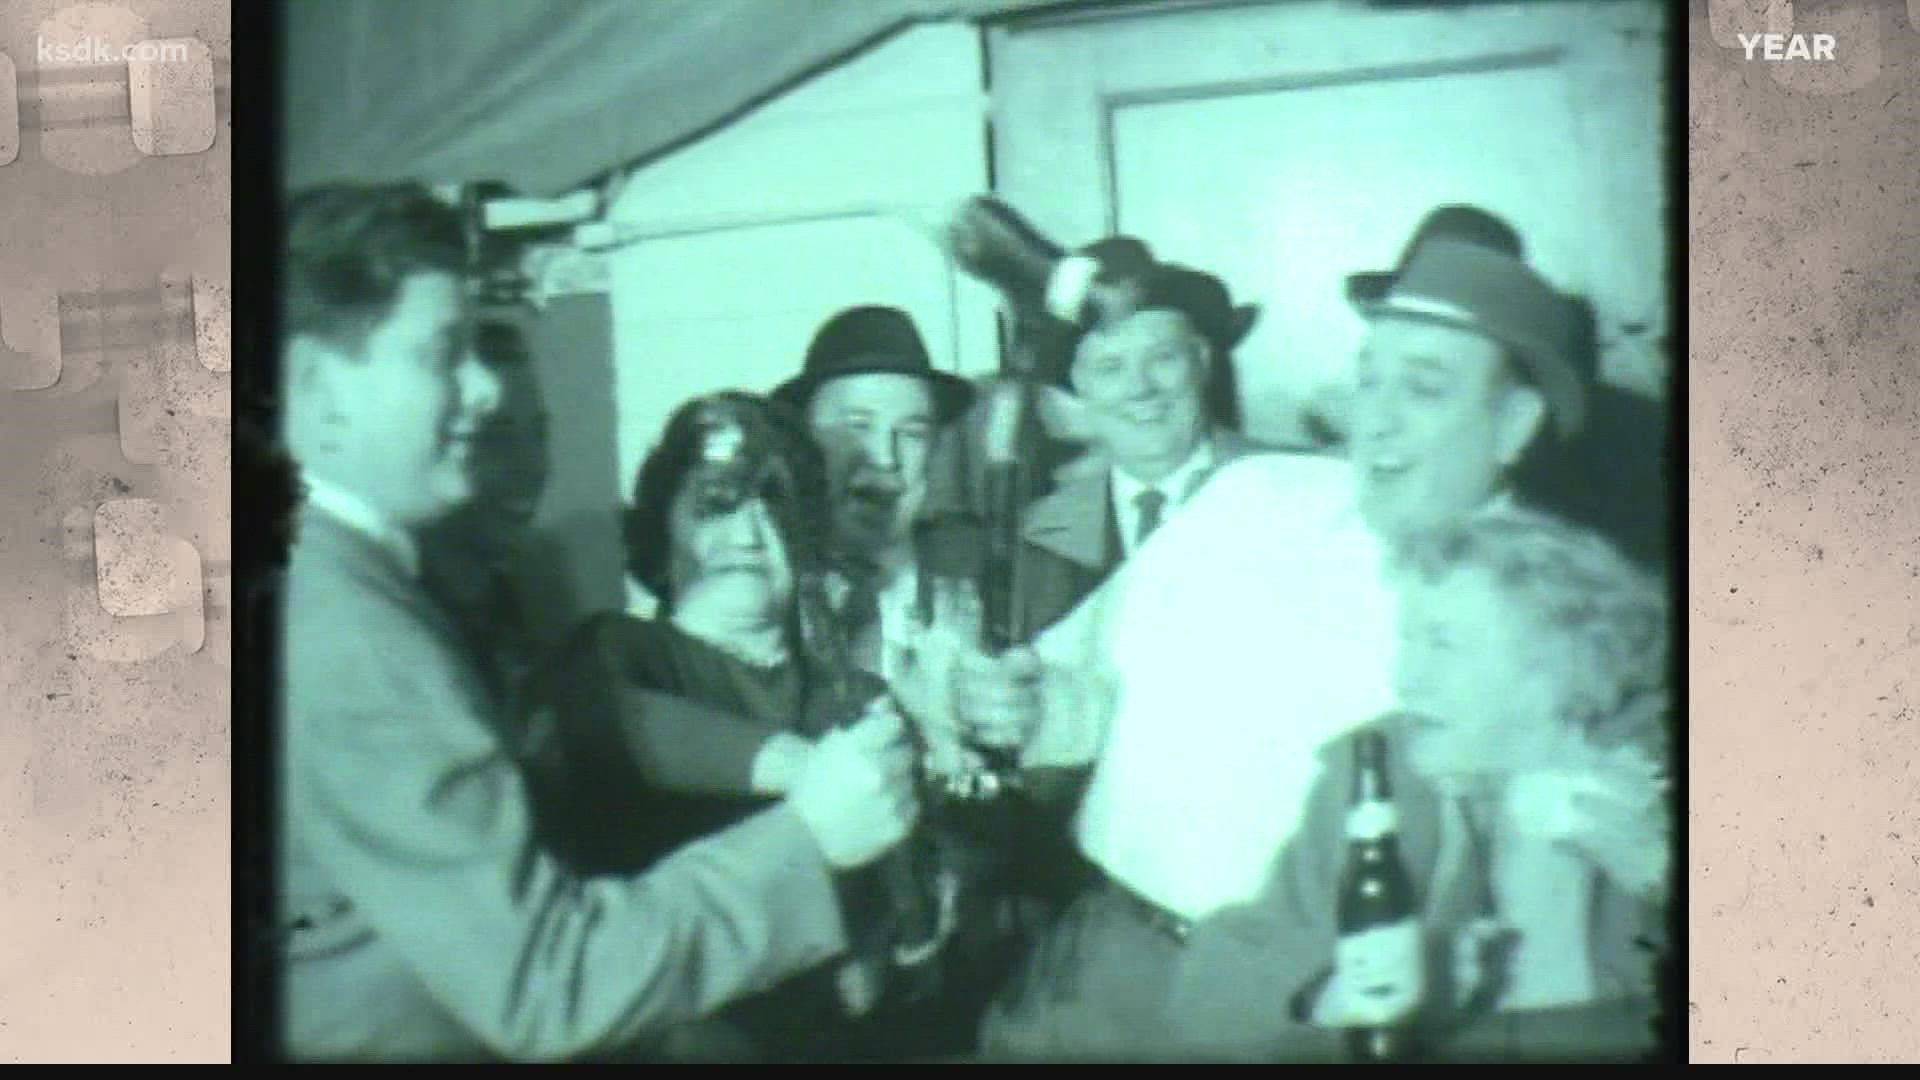 Here's video from 1960 of people enjoying some beer and corned beef and cabbage at an unnamed tavern in the city.